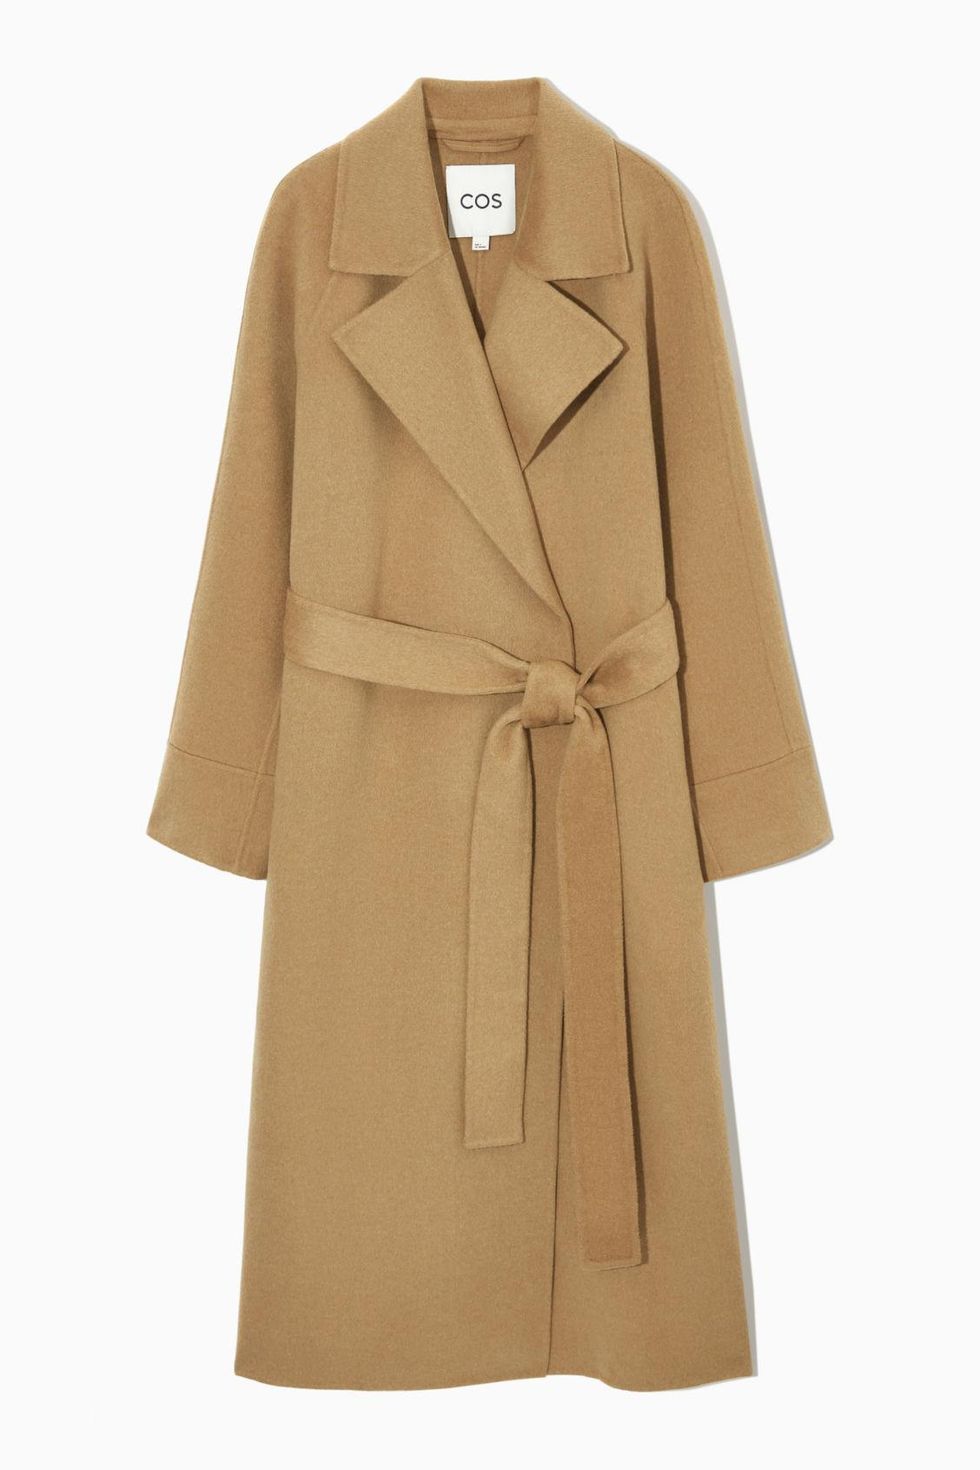 The Best Winter Coat Trends 2022 — Trench Coats, Puffers Brit + Co